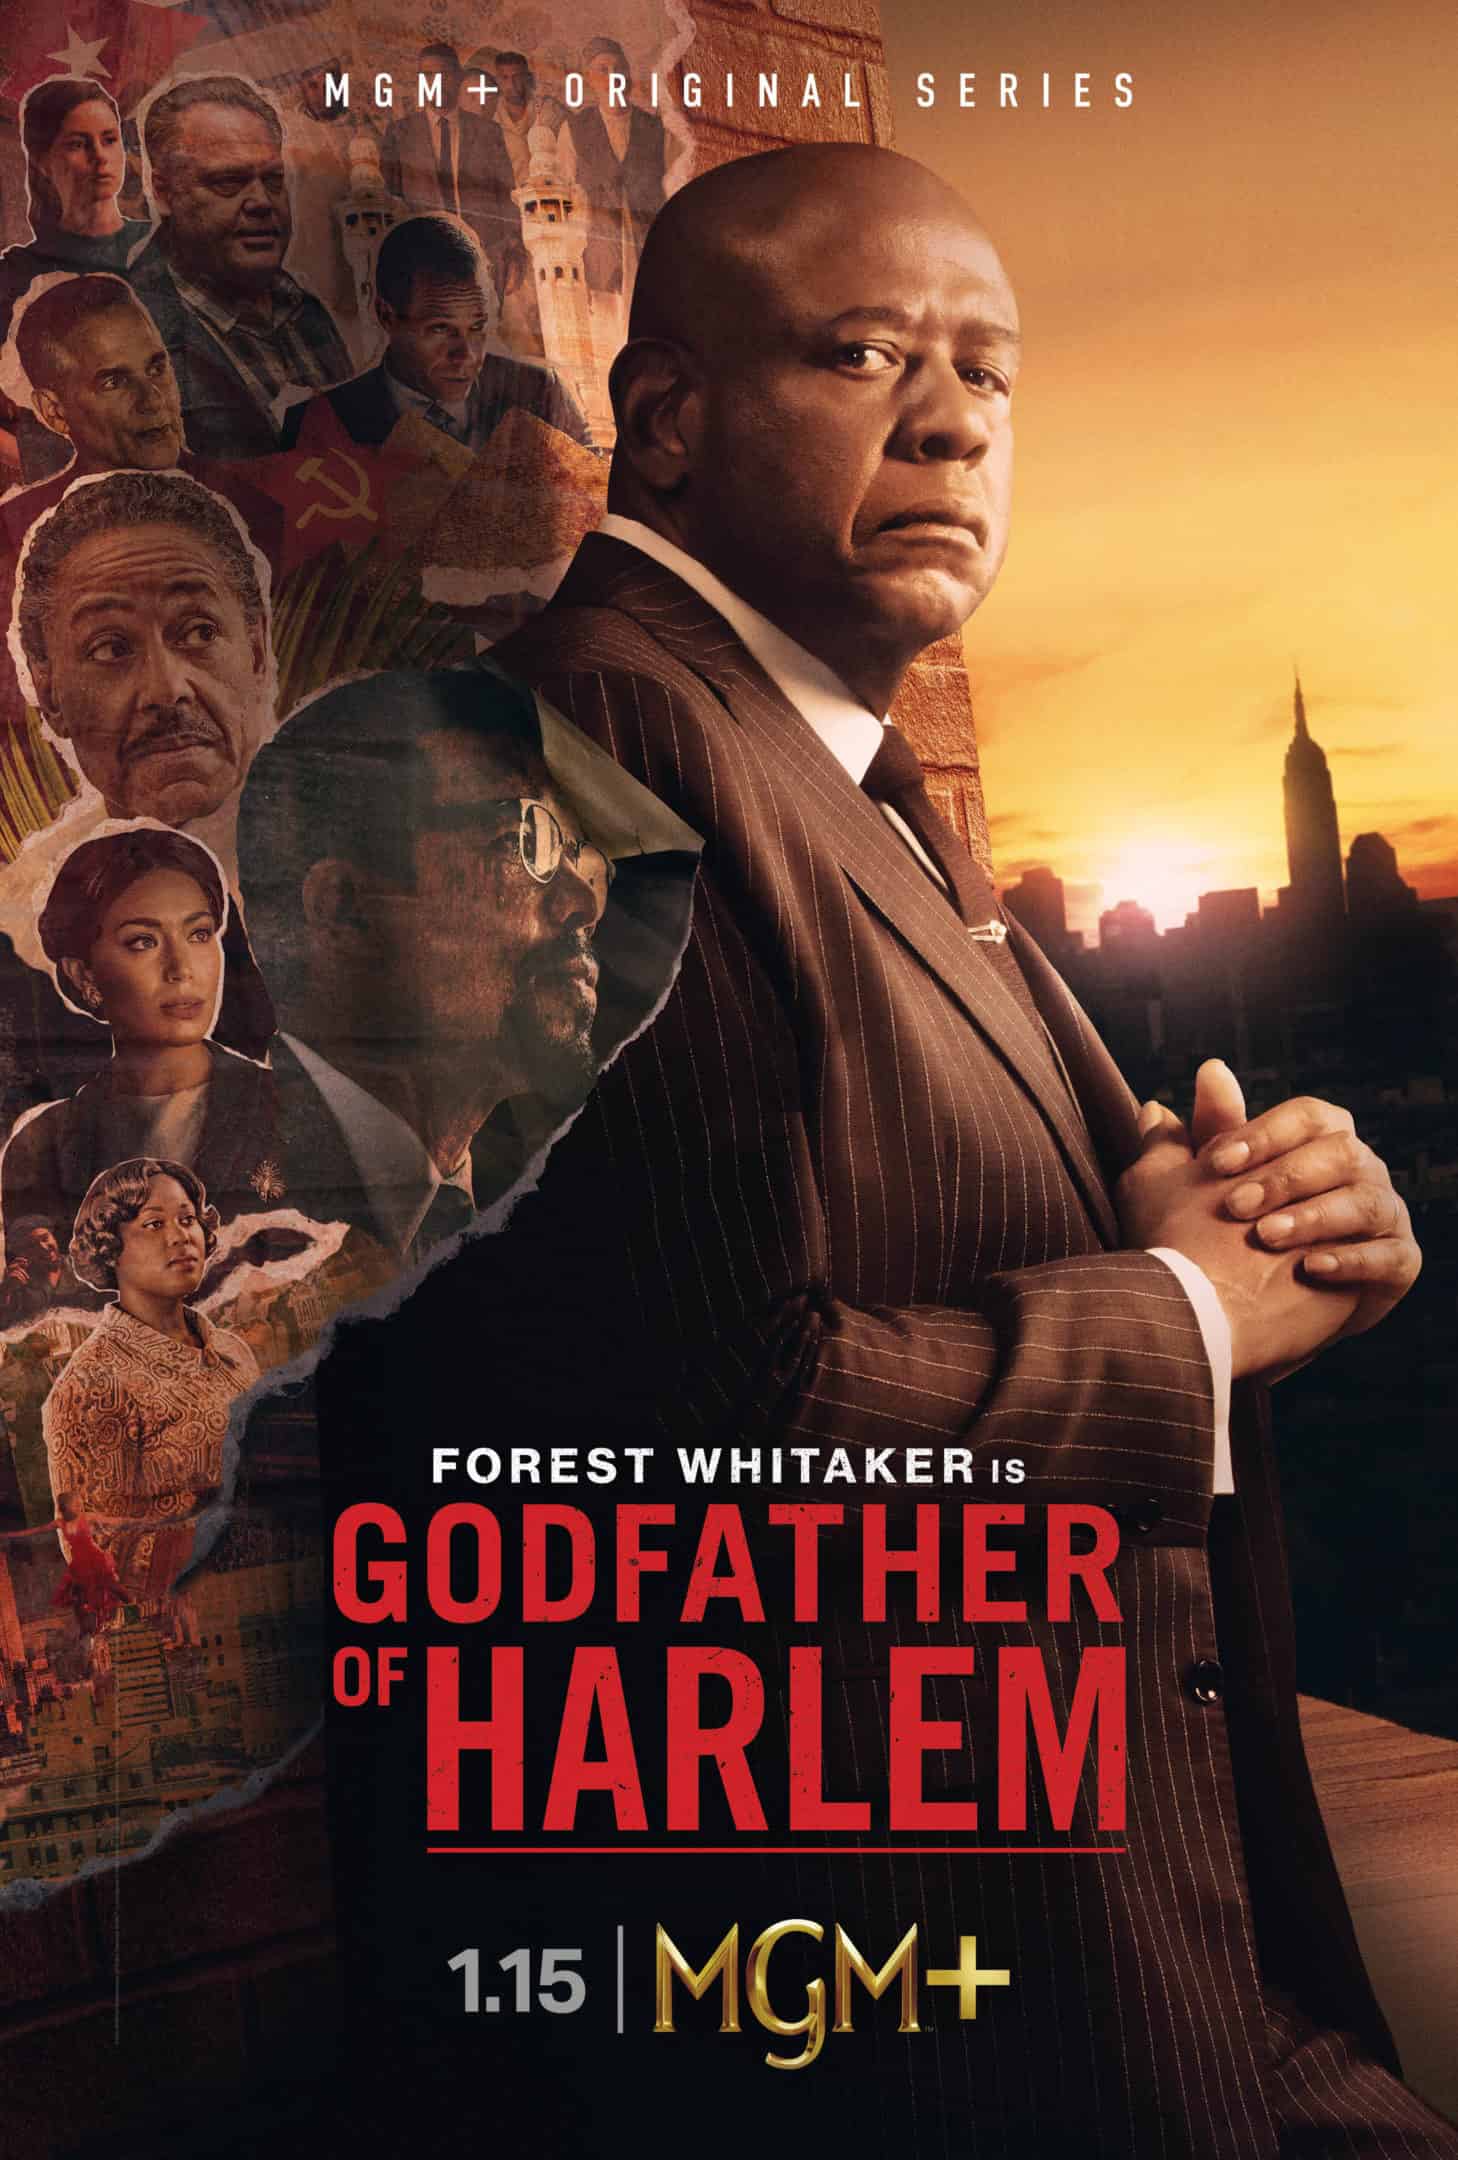 MGM+ debuts the trailer for Godfather of Harlem: Season 3 18